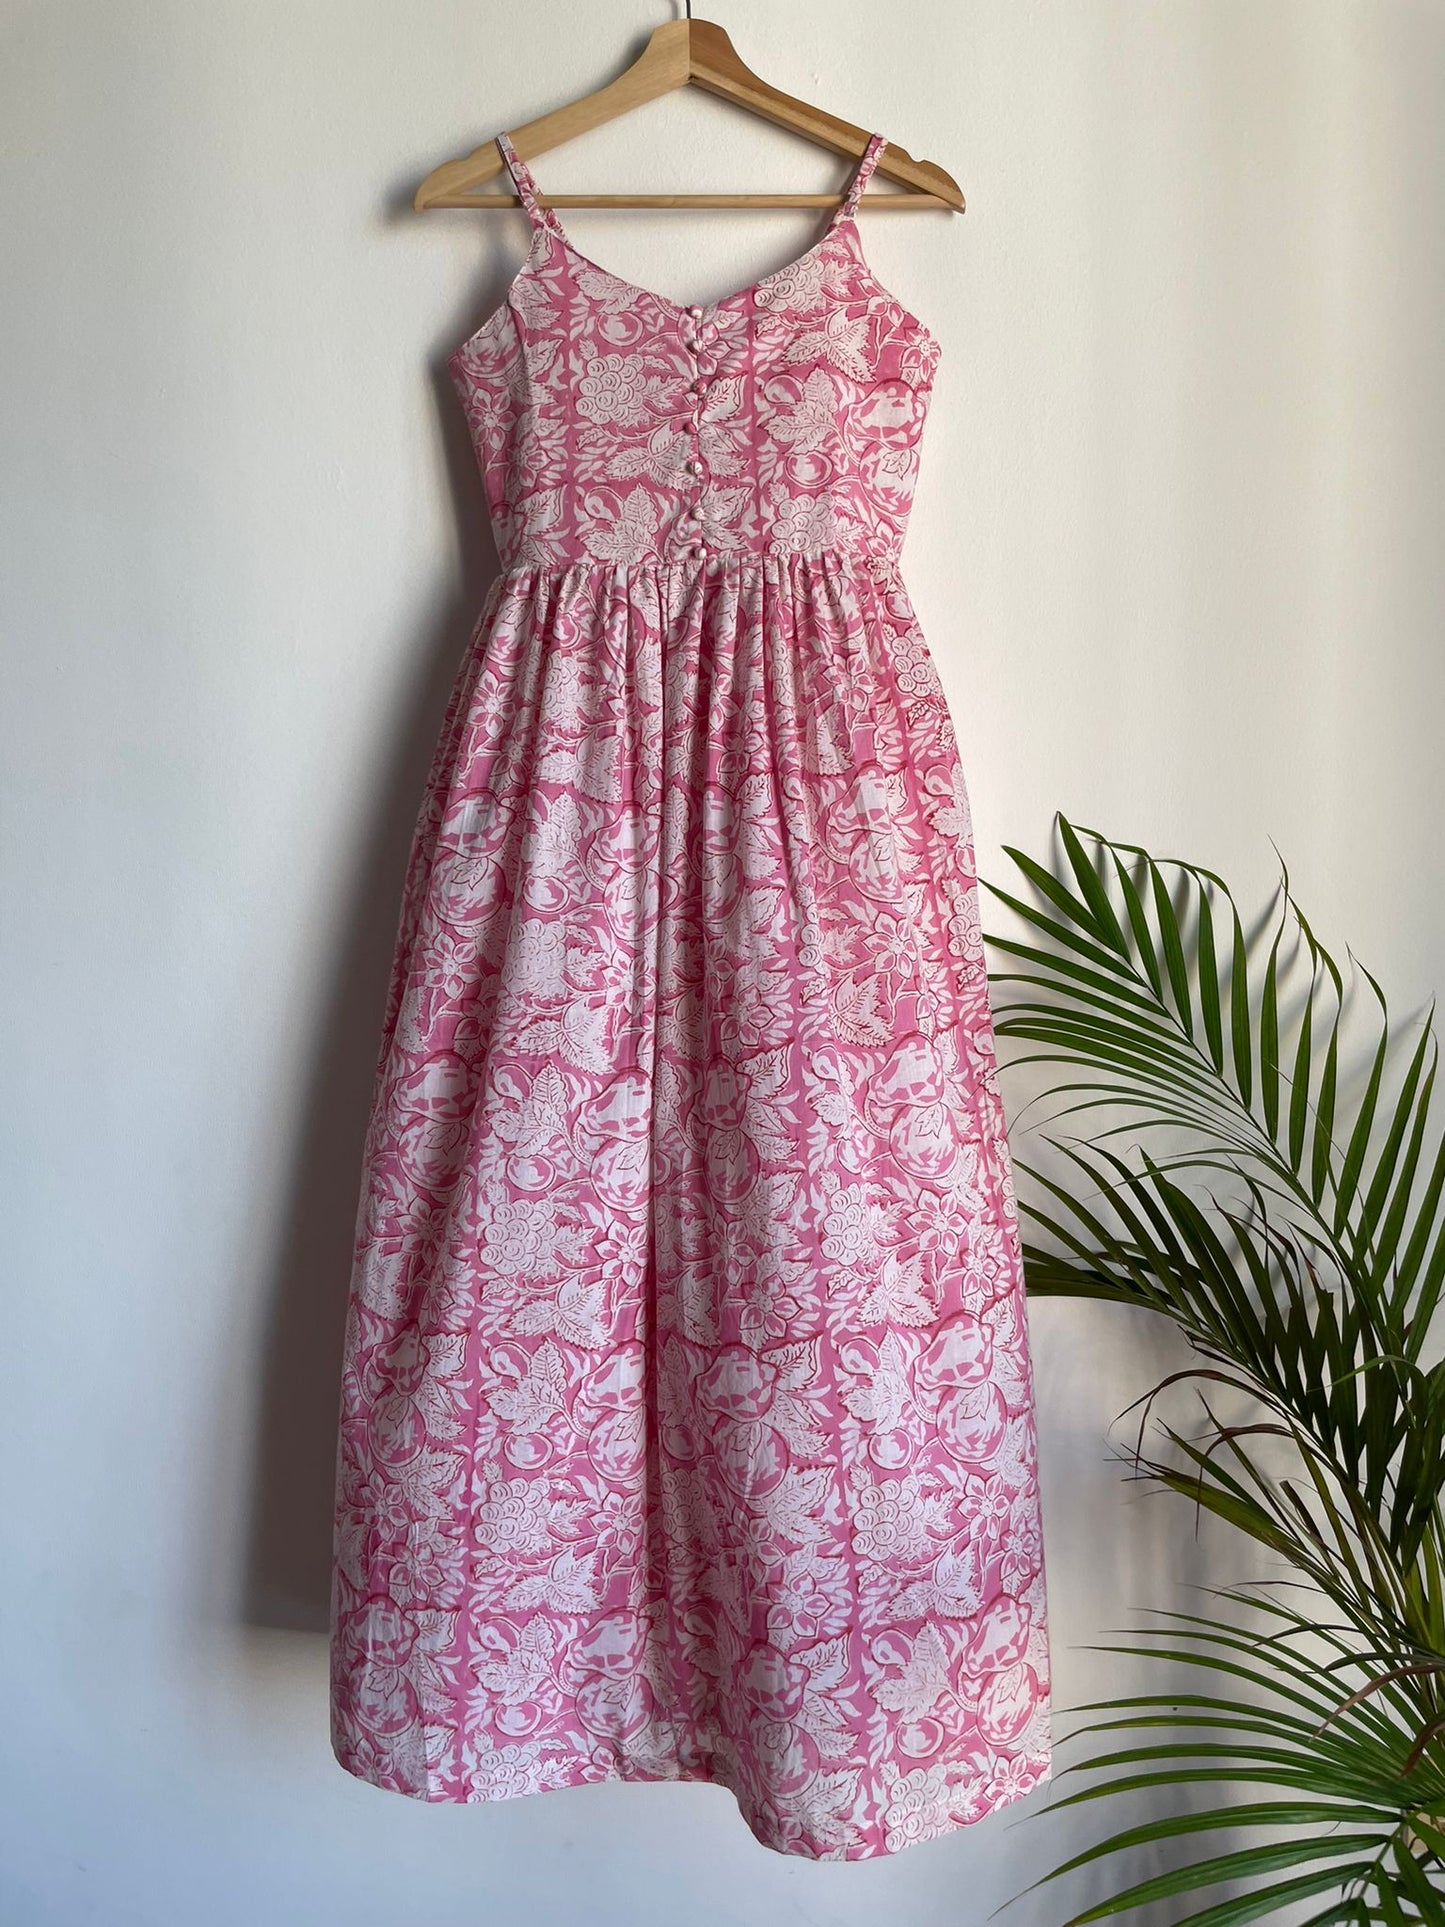 Pink floral dress for women, handmade in India